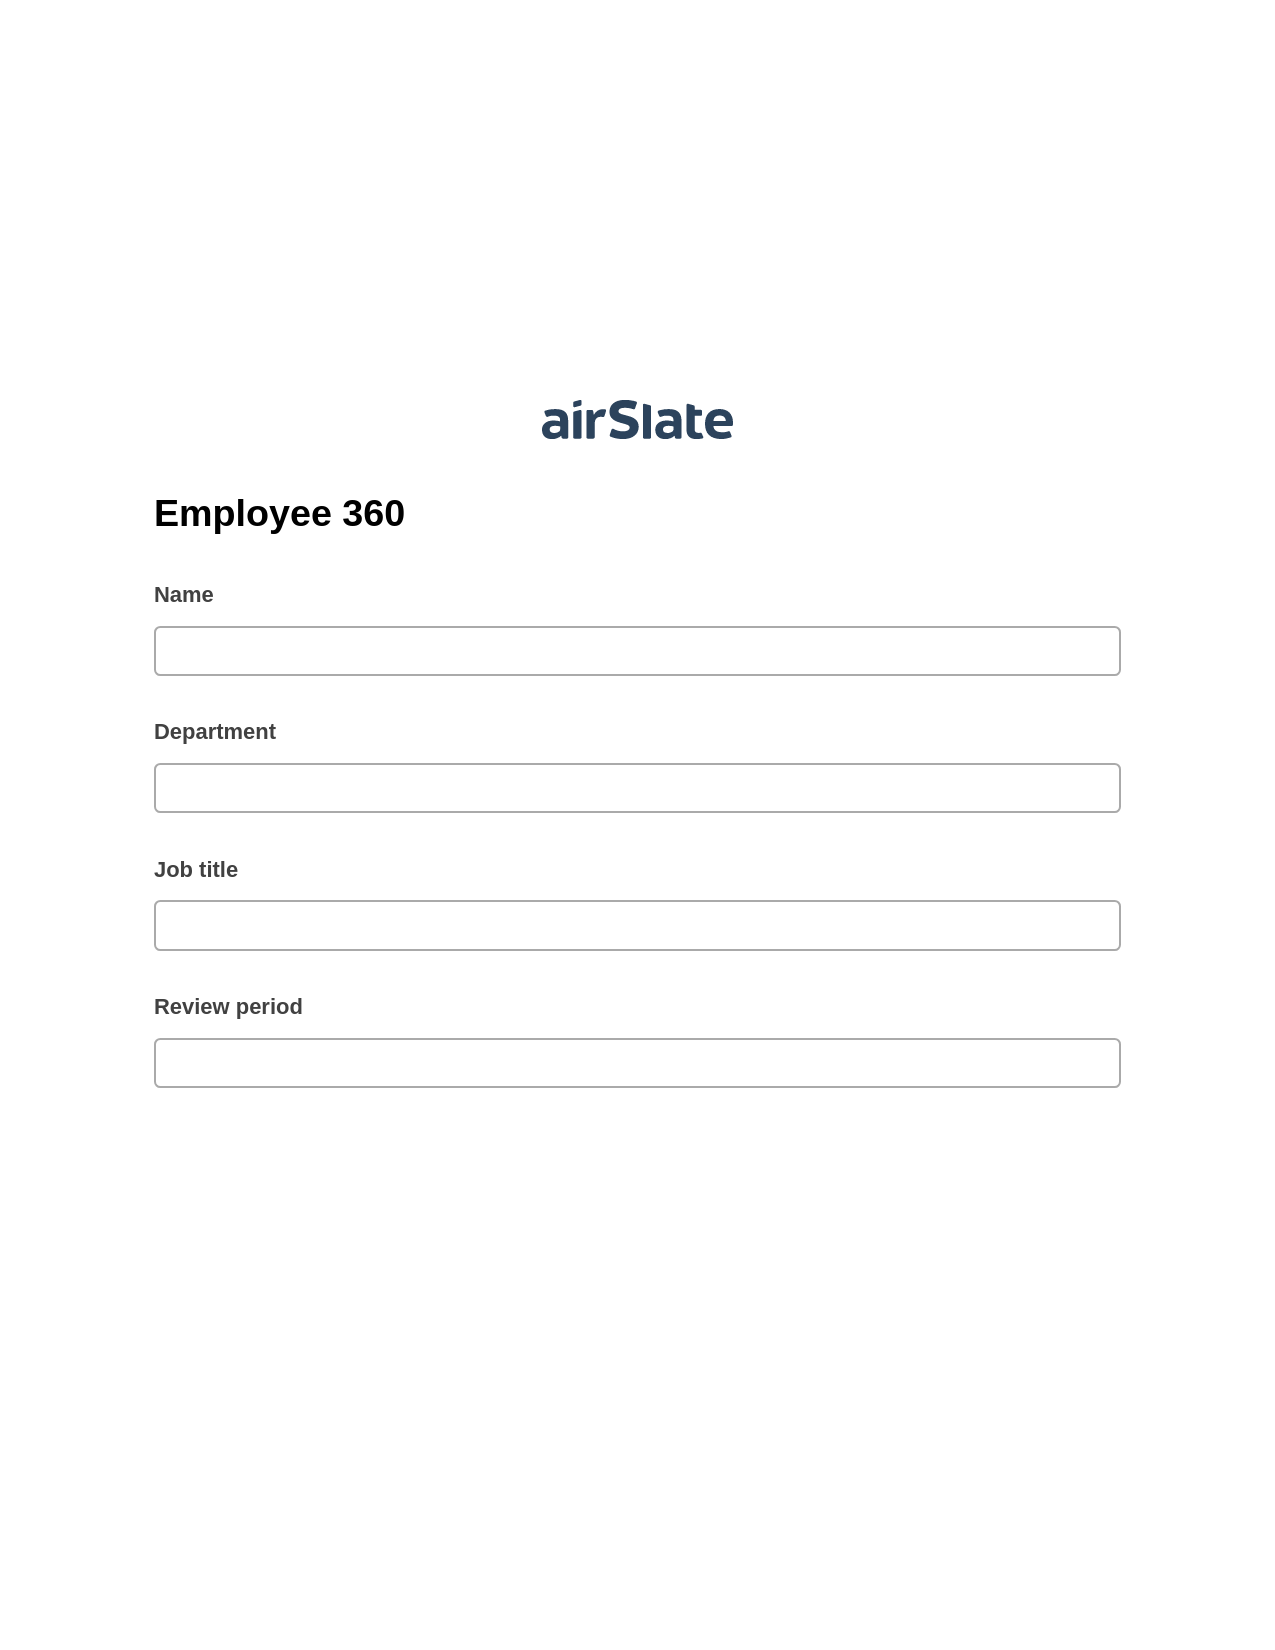 Multirole Employee 360 Pre-fill from Salesforce Records with SOQL Bot, Create MS Dynamics 365 Records Bot, Export to Smartsheet